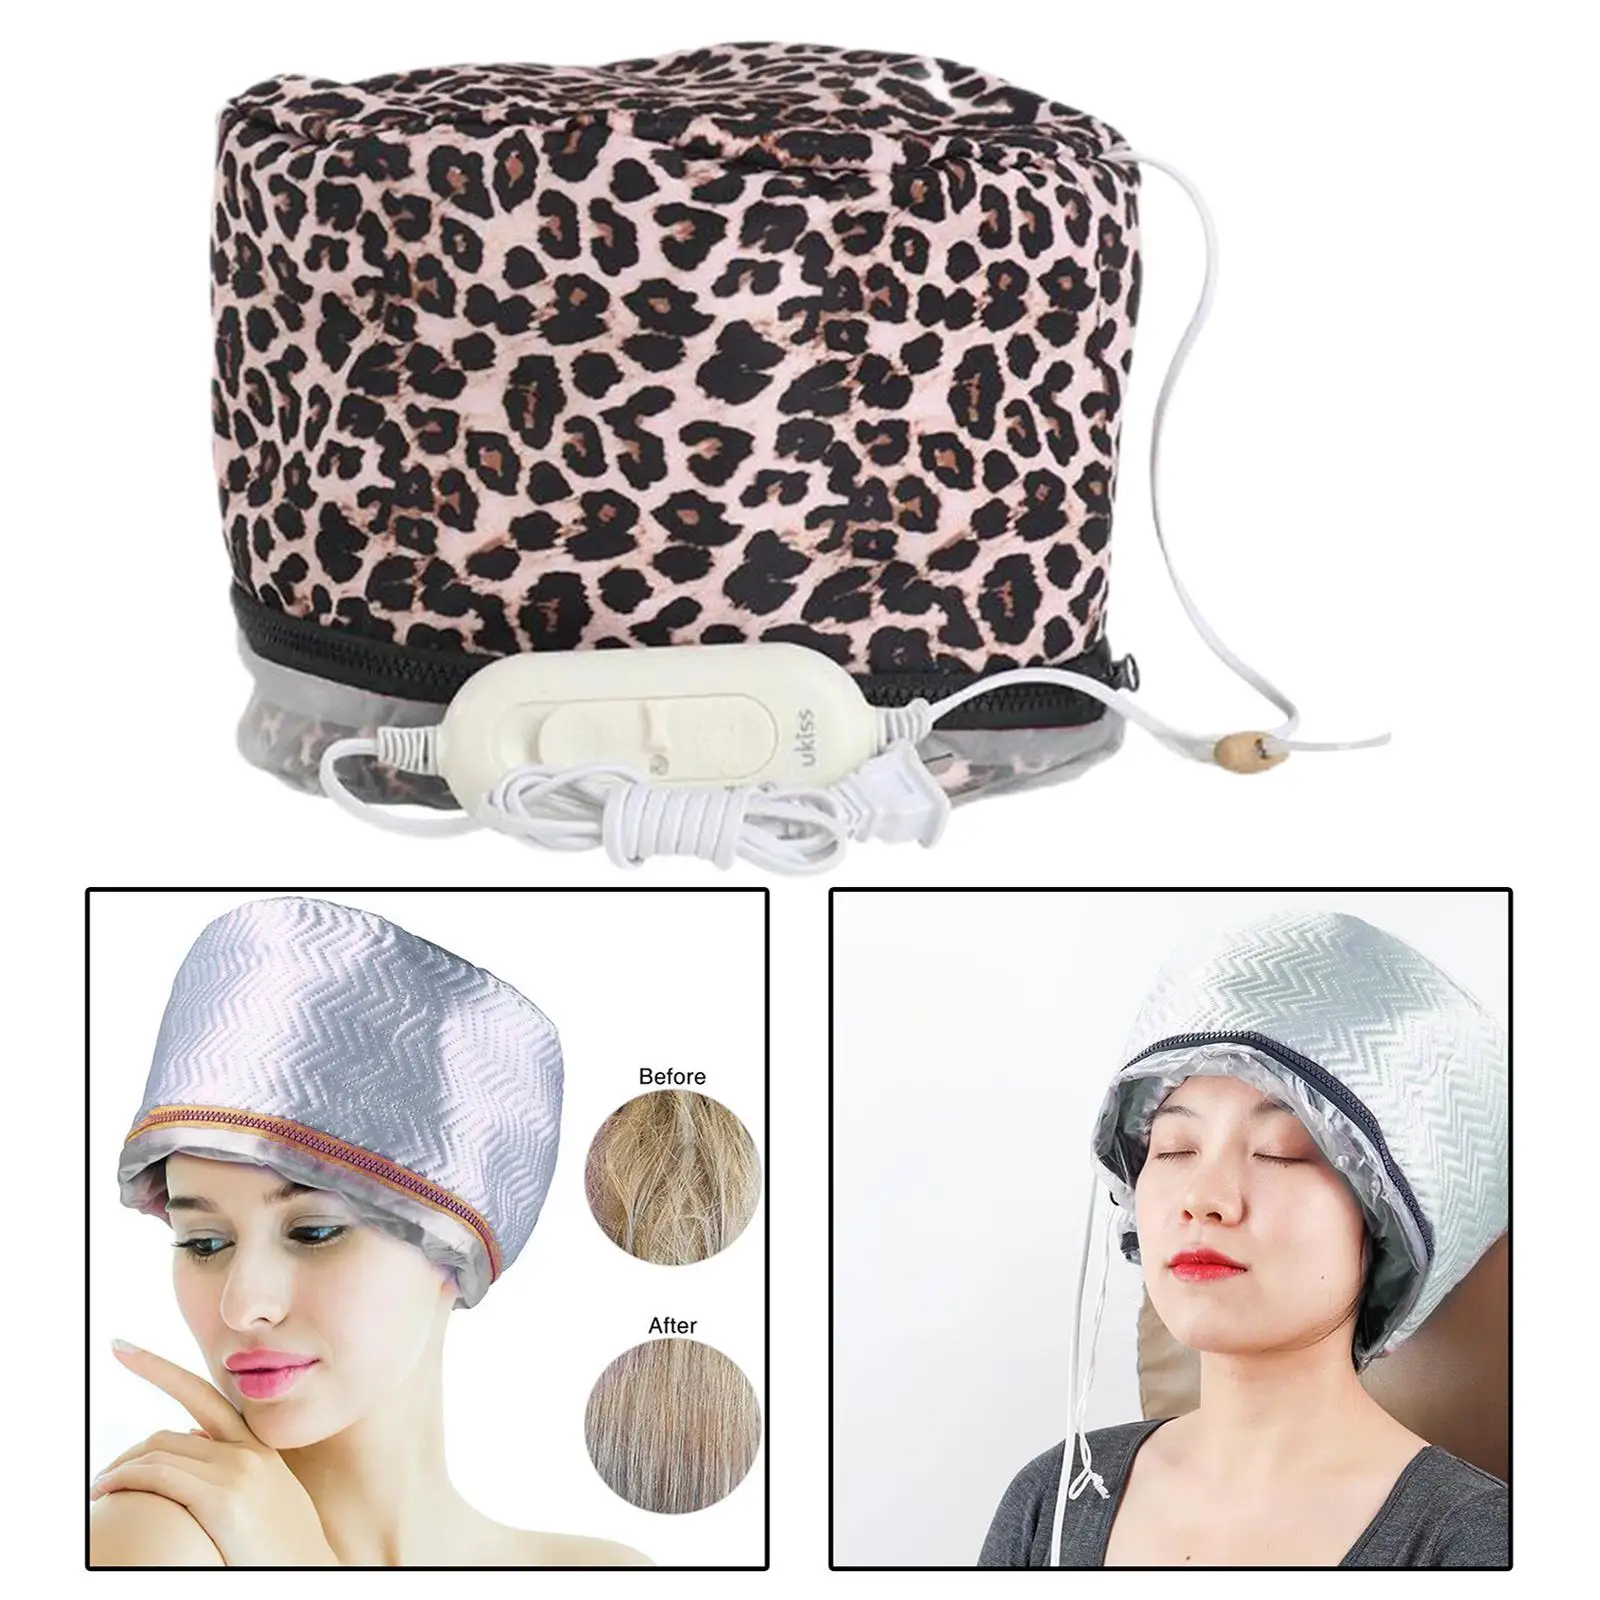 Hair Steamer Heating Hat Thermal Caps Family Personal Care 3 Level Temperature Control US